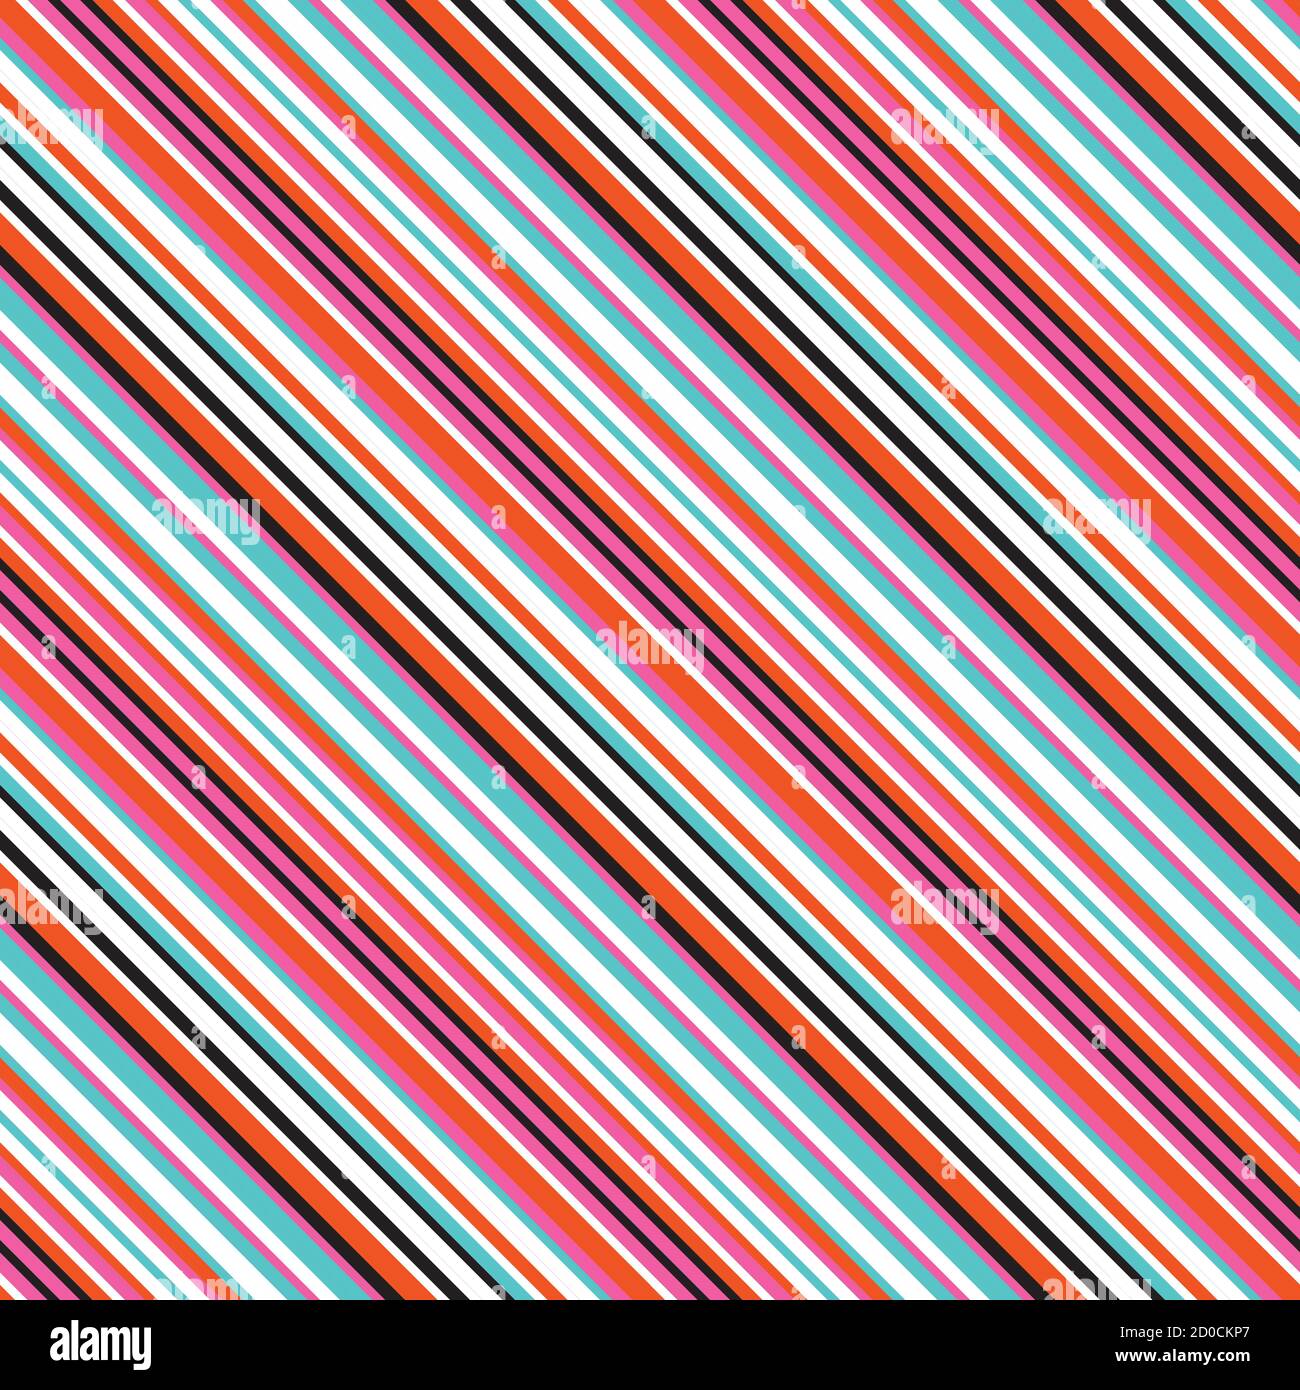 Seamless pattern with oblique colored lines Stock Vector